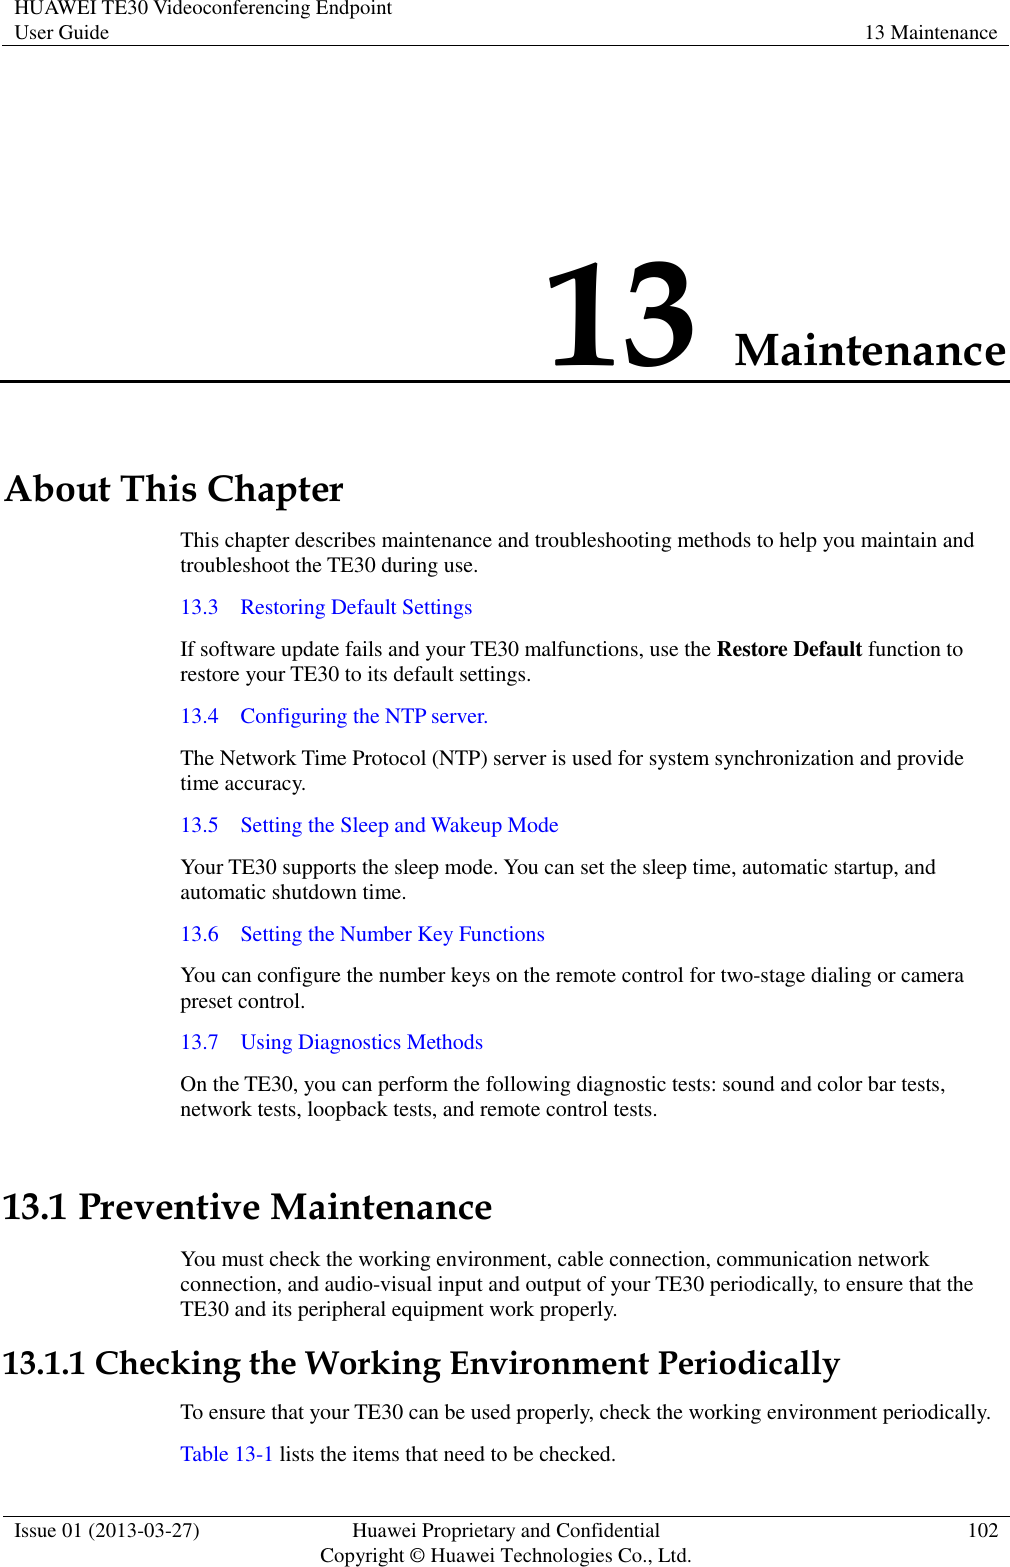 HUAWEI TE30 Videoconferencing Endpoint User Guide 13 Maintenance  Issue 01 (2013-03-27) Huawei Proprietary and Confidential                                     Copyright © Huawei Technologies Co., Ltd. 102  13 Maintenance About This Chapter This chapter describes maintenance and troubleshooting methods to help you maintain and troubleshoot the TE30 during use. 13.3    Restoring Default Settings If software update fails and your TE30 malfunctions, use the Restore Default function to restore your TE30 to its default settings. 13.4    Configuring the NTP server. The Network Time Protocol (NTP) server is used for system synchronization and provide time accuracy. 13.5    Setting the Sleep and Wakeup Mode Your TE30 supports the sleep mode. You can set the sleep time, automatic startup, and automatic shutdown time. 13.6    Setting the Number Key Functions You can configure the number keys on the remote control for two-stage dialing or camera preset control. 13.7    Using Diagnostics Methods On the TE30, you can perform the following diagnostic tests: sound and color bar tests, network tests, loopback tests, and remote control tests. 13.1 Preventive Maintenance You must check the working environment, cable connection, communication network connection, and audio-visual input and output of your TE30 periodically, to ensure that the TE30 and its peripheral equipment work properly. 13.1.1 Checking the Working Environment Periodically To ensure that your TE30 can be used properly, check the working environment periodically. Table 13-1 lists the items that need to be checked. 